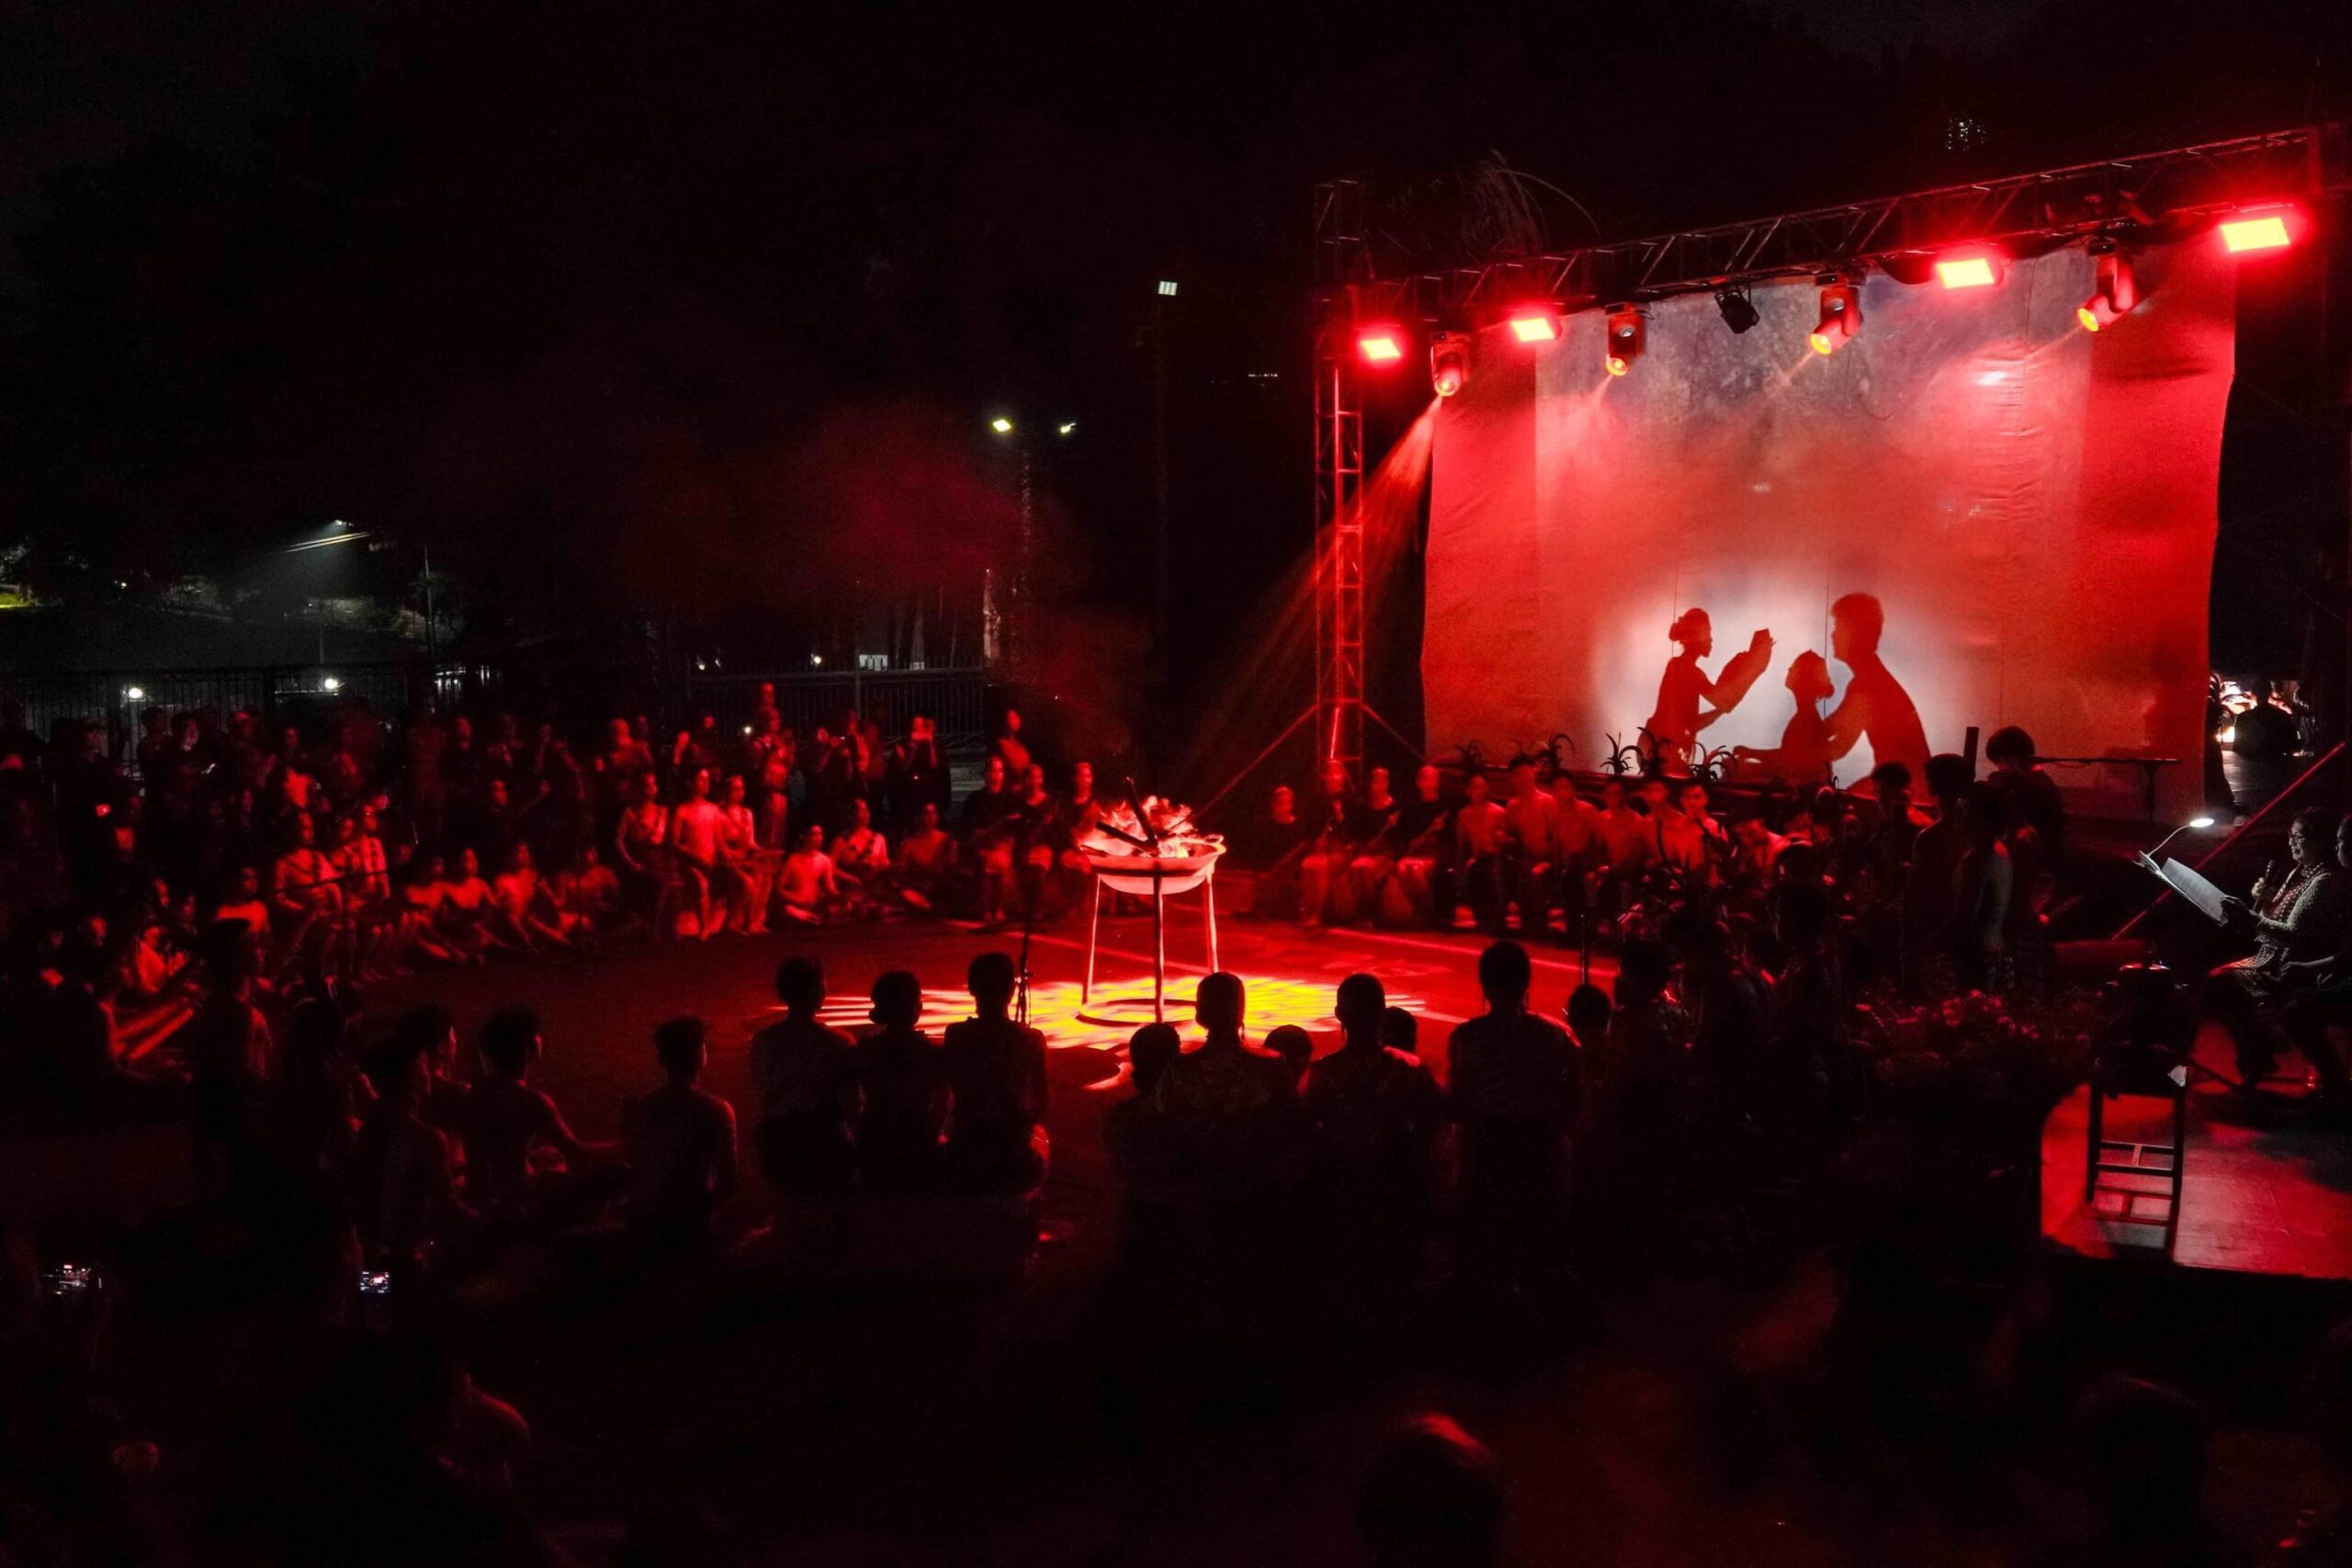 Bobleh Taku: Baguio’s Ibagiw arts festival blends tradition, modernity